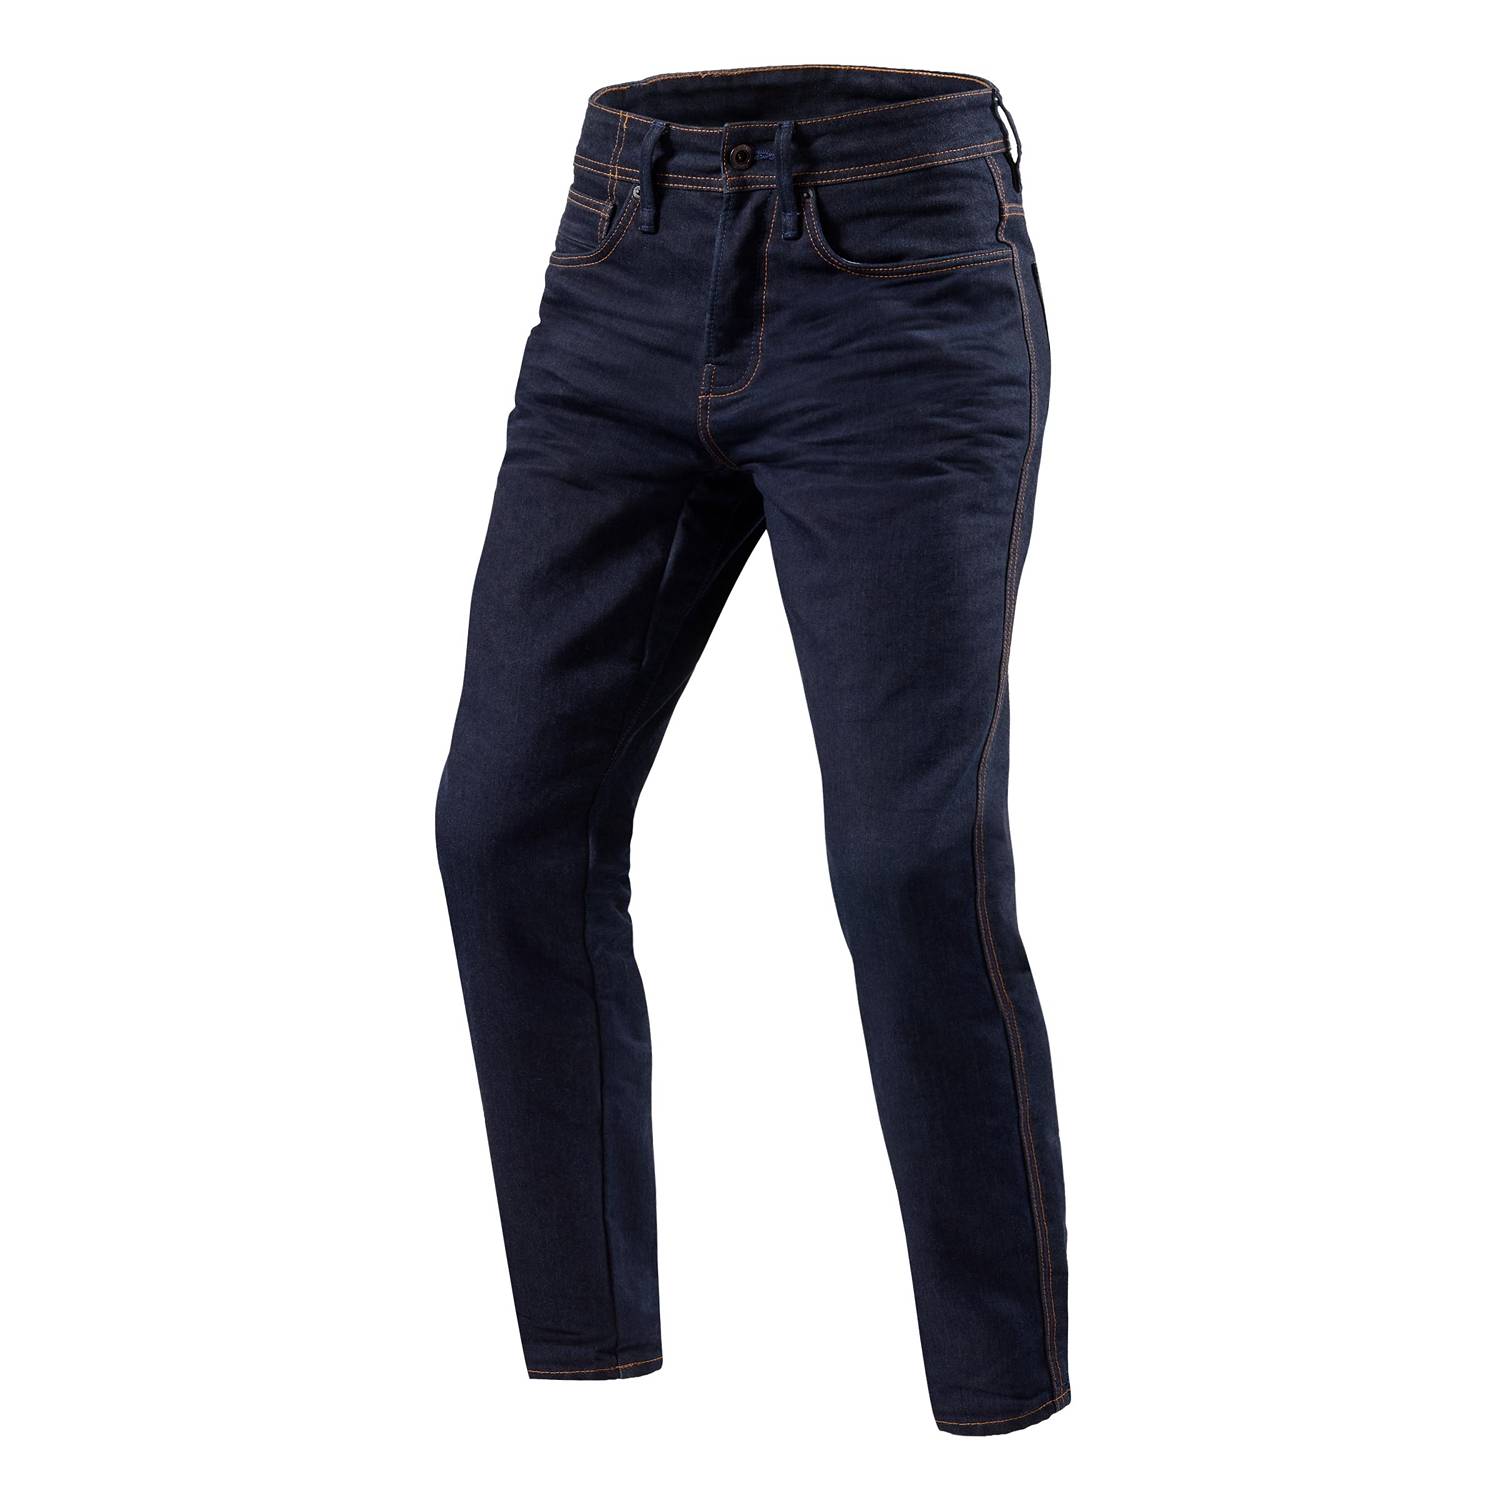 Image of REV'IT! Jeans Reed RF Dark Blue Used Motorcycle Jeans Size L36/W31 ID 8700001337076